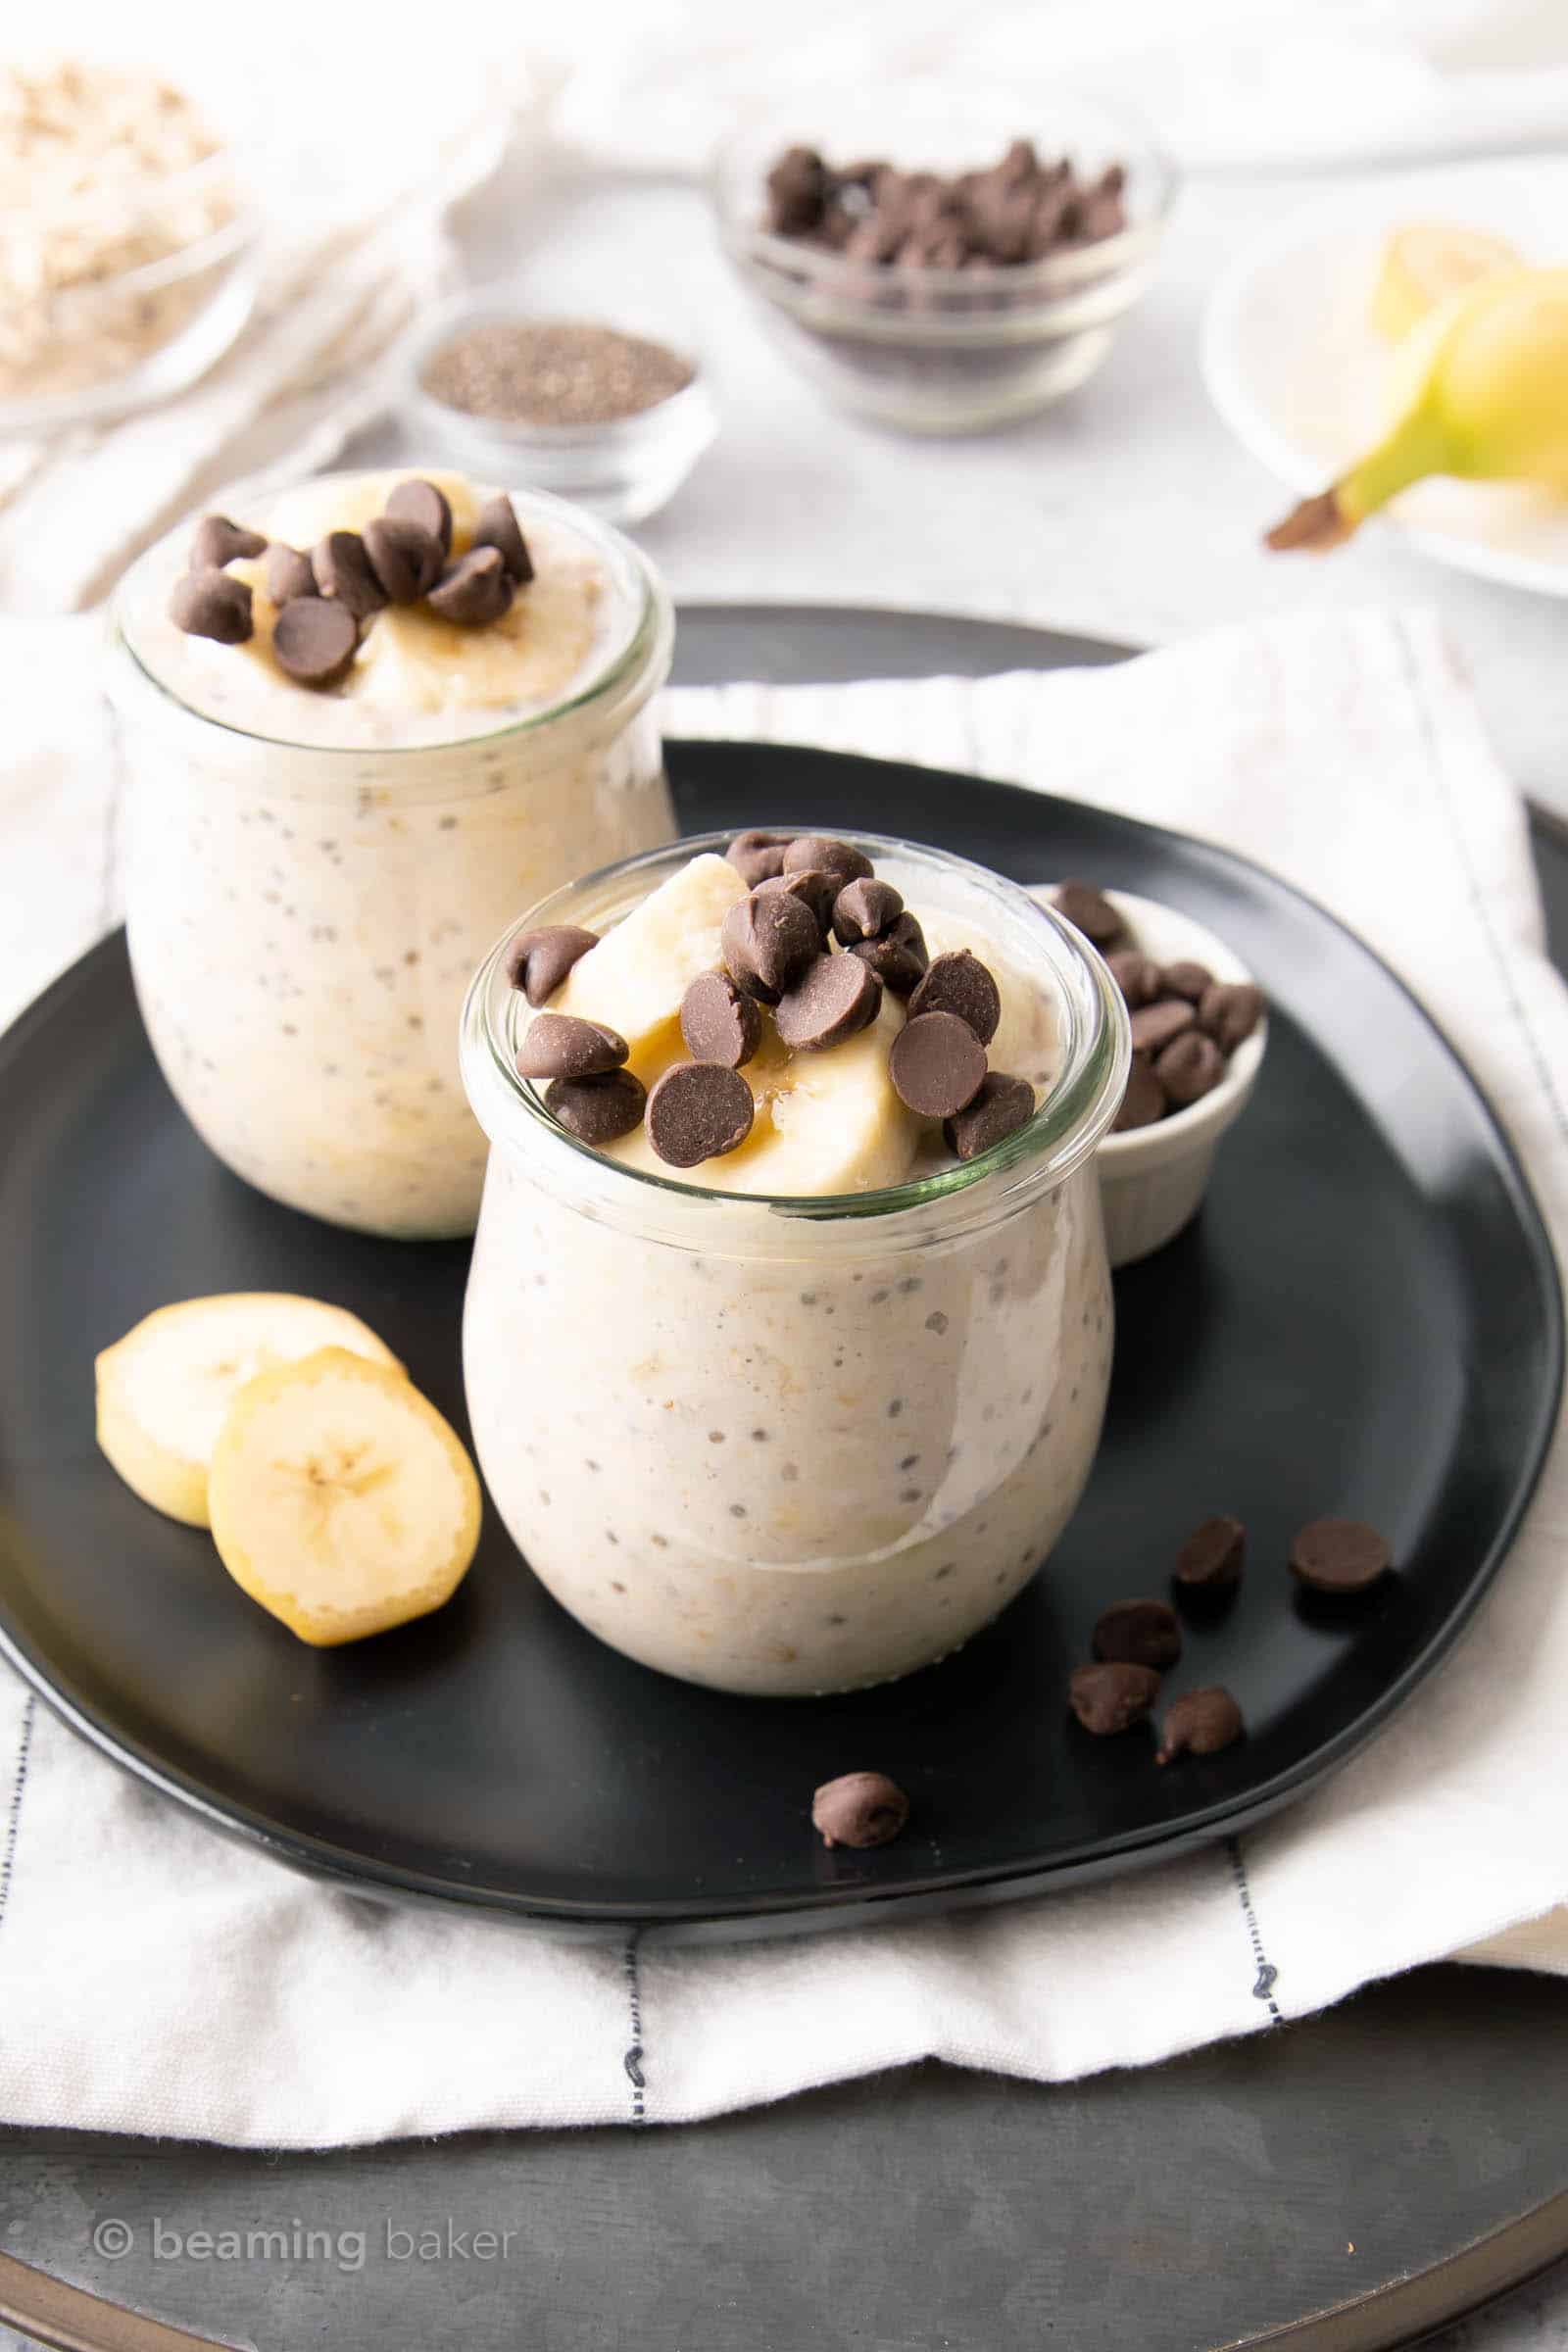 jars of overnight oats banana chocolate chip with slices of banana and chocolate chips